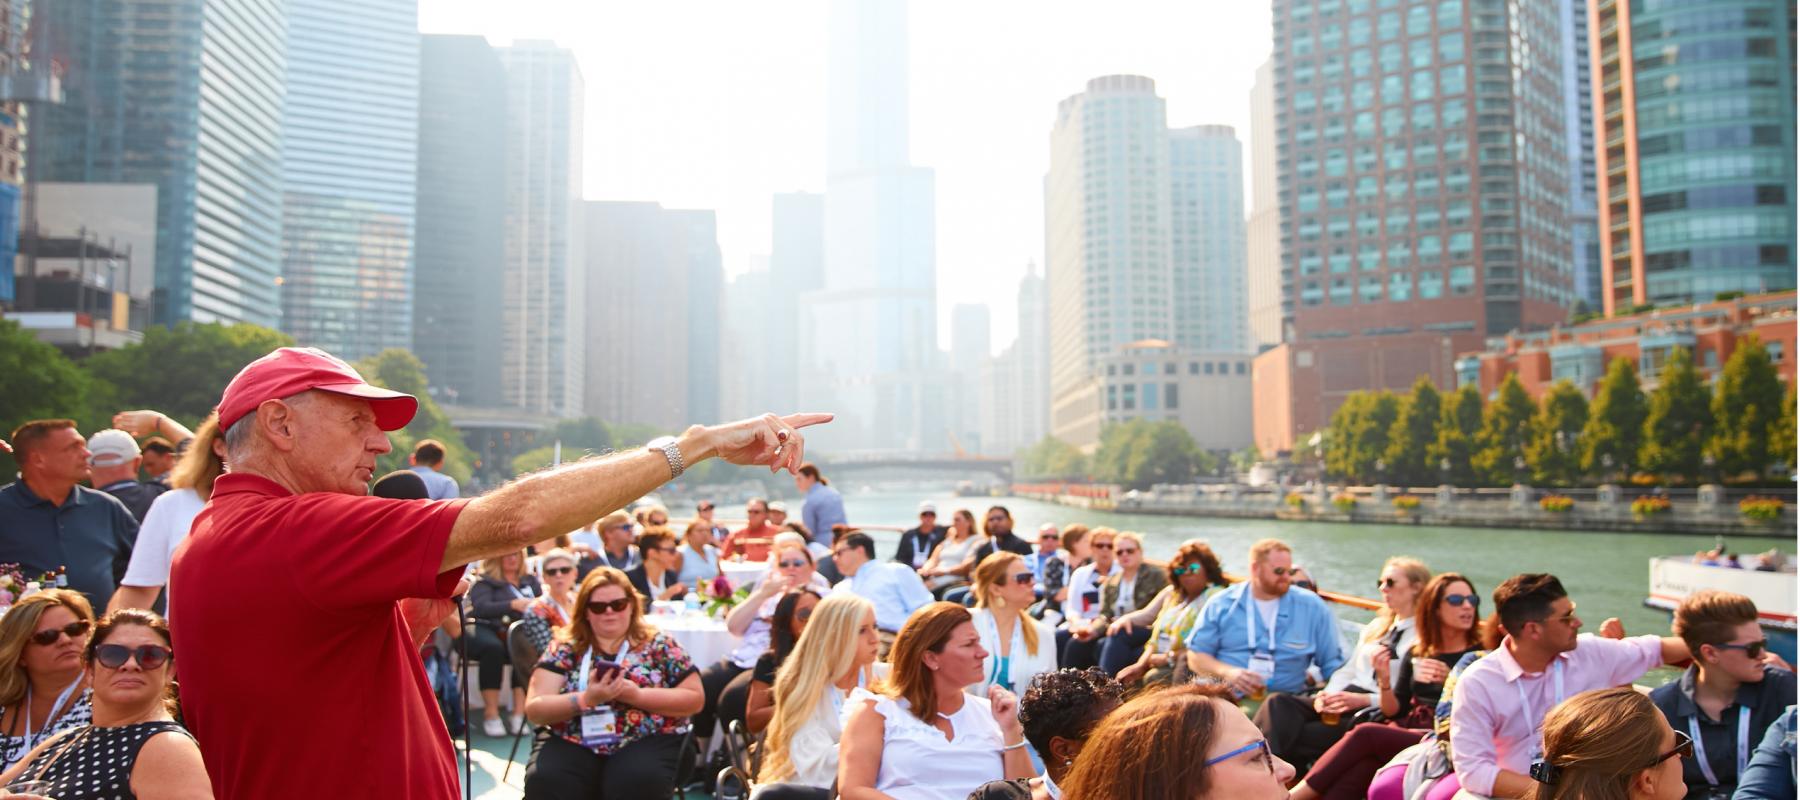 odyssey river boat cruise chicago